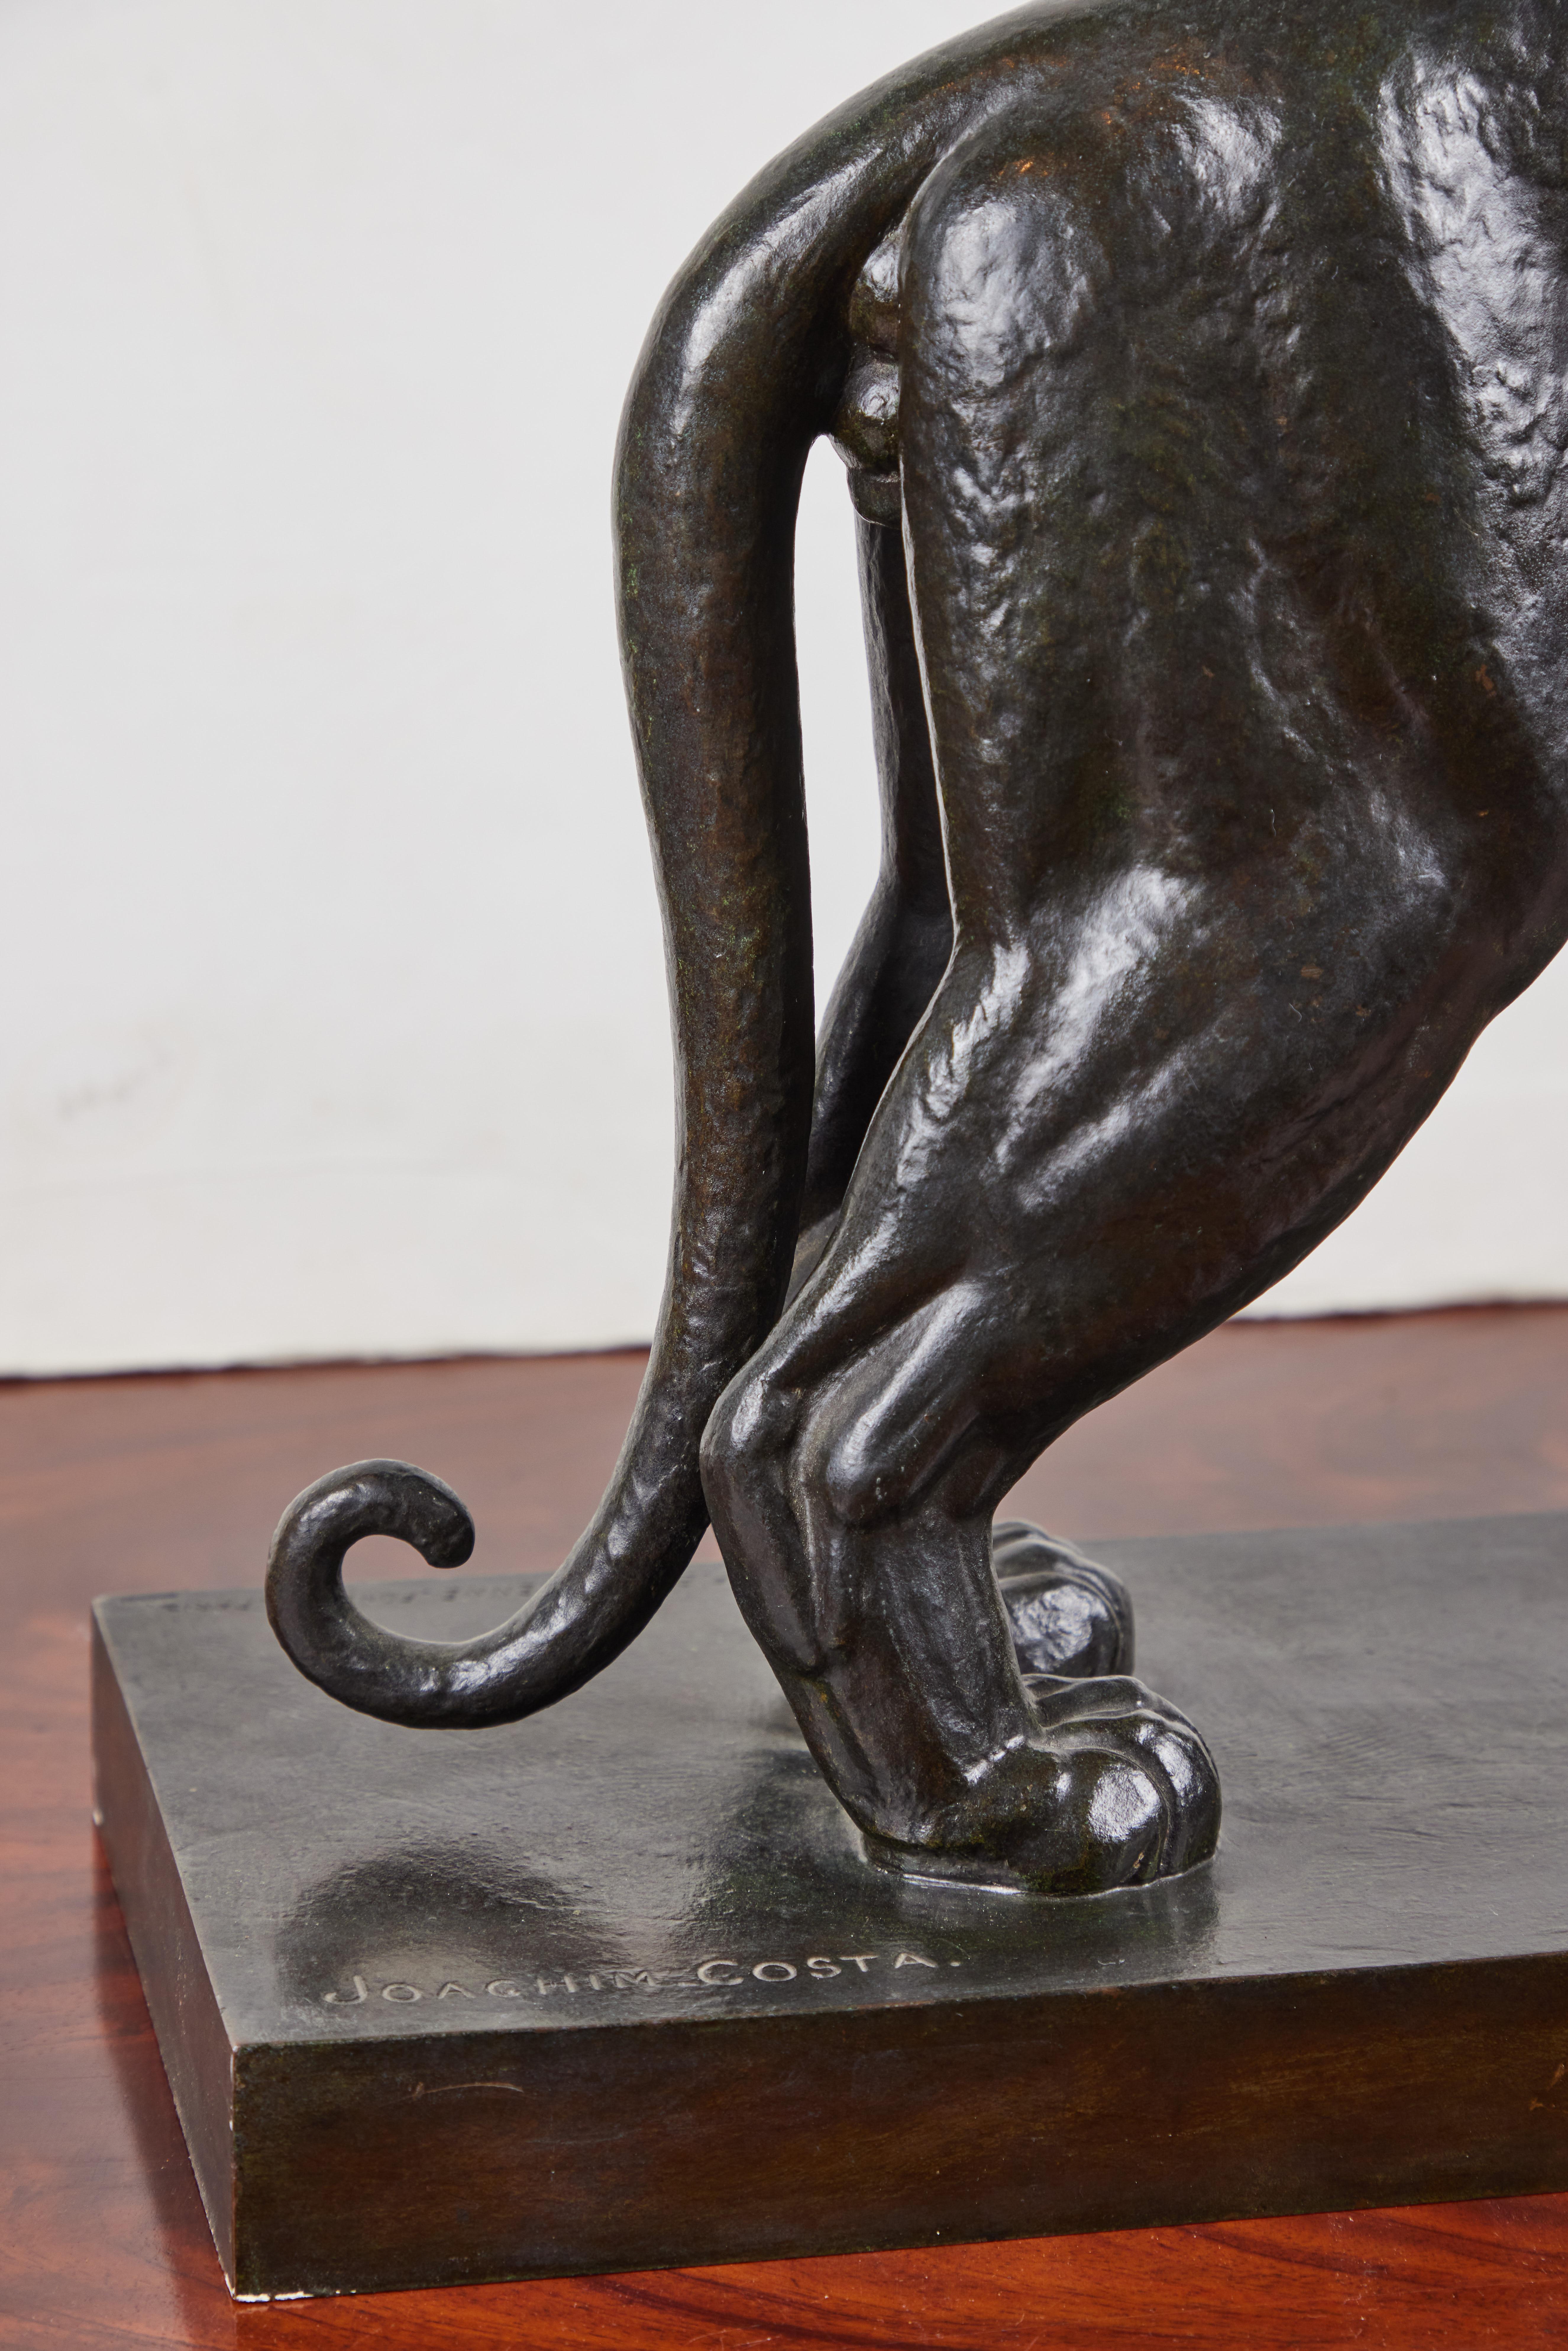 Tigre- A striking, vital, patinated cast bronze tiger by listed French artist, Joachim Costa (1888-1971). The piece is stamped with it's foundation location, the famed 